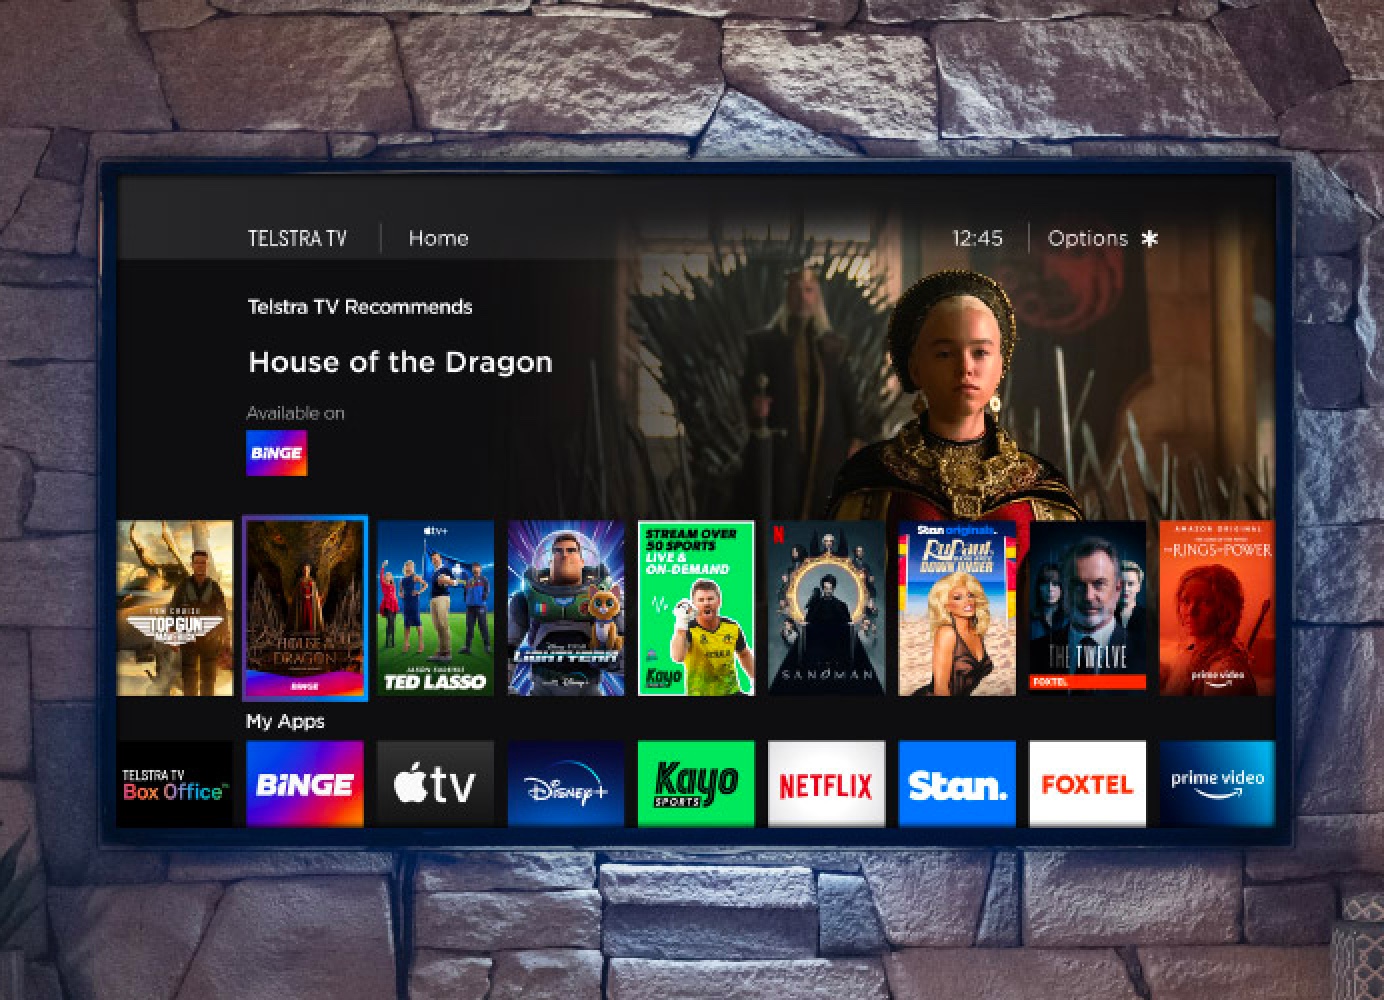 Promotional image of Telstra TV showing a screen with multiple shows